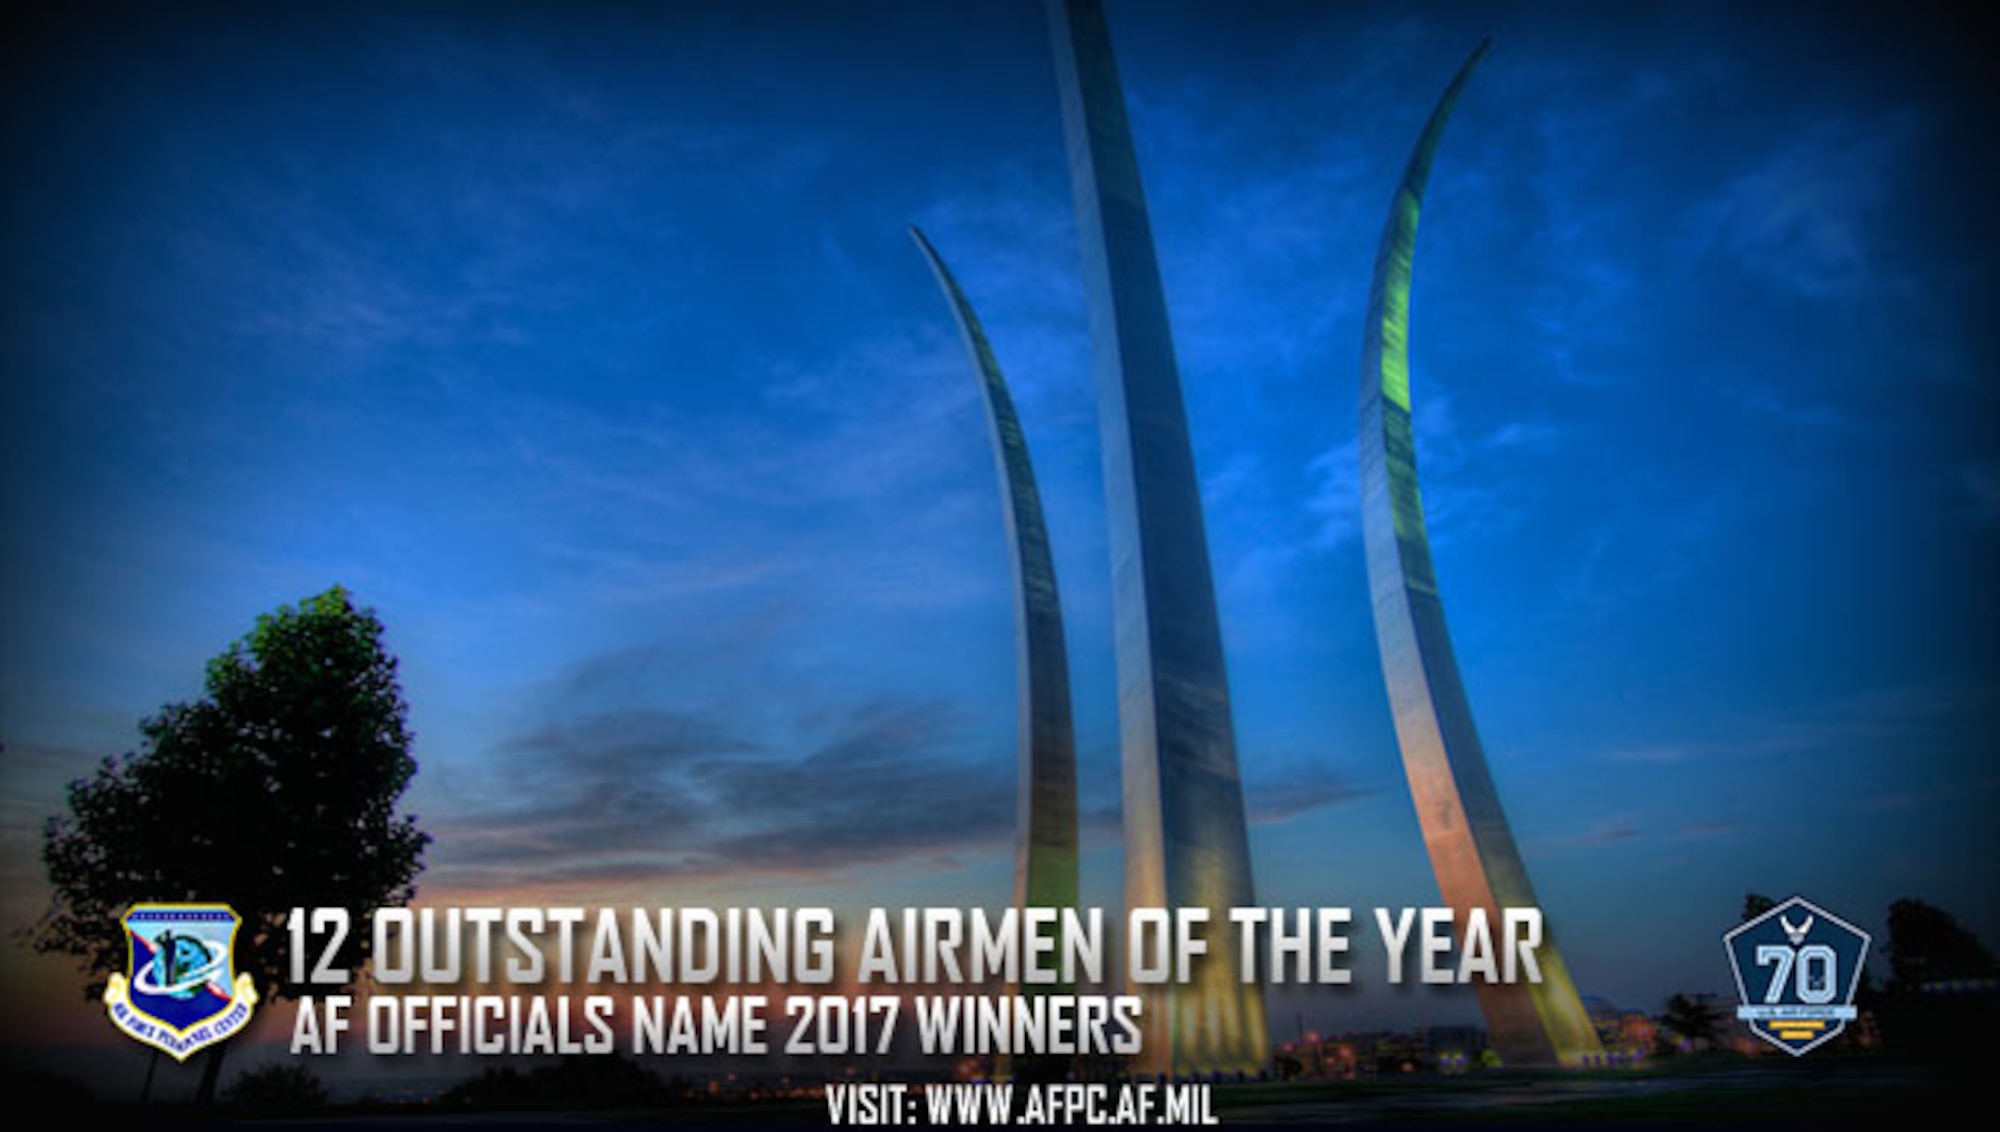 Air Force officials have named the service's top enlisted members, announcing the 12 Outstanding Airmen of the Year for 2017. An Air Force selection board at the Air Force Personnel Center considered 36 nominees who represented major commands, direct reporting units, field operating agencies and Headquarters Air Force. The board selected the final 12 Airmen based on superior leadership, job performance and personal achievements. (U.S. Air Force graphic by Staff Sgt. Alexx Pons)